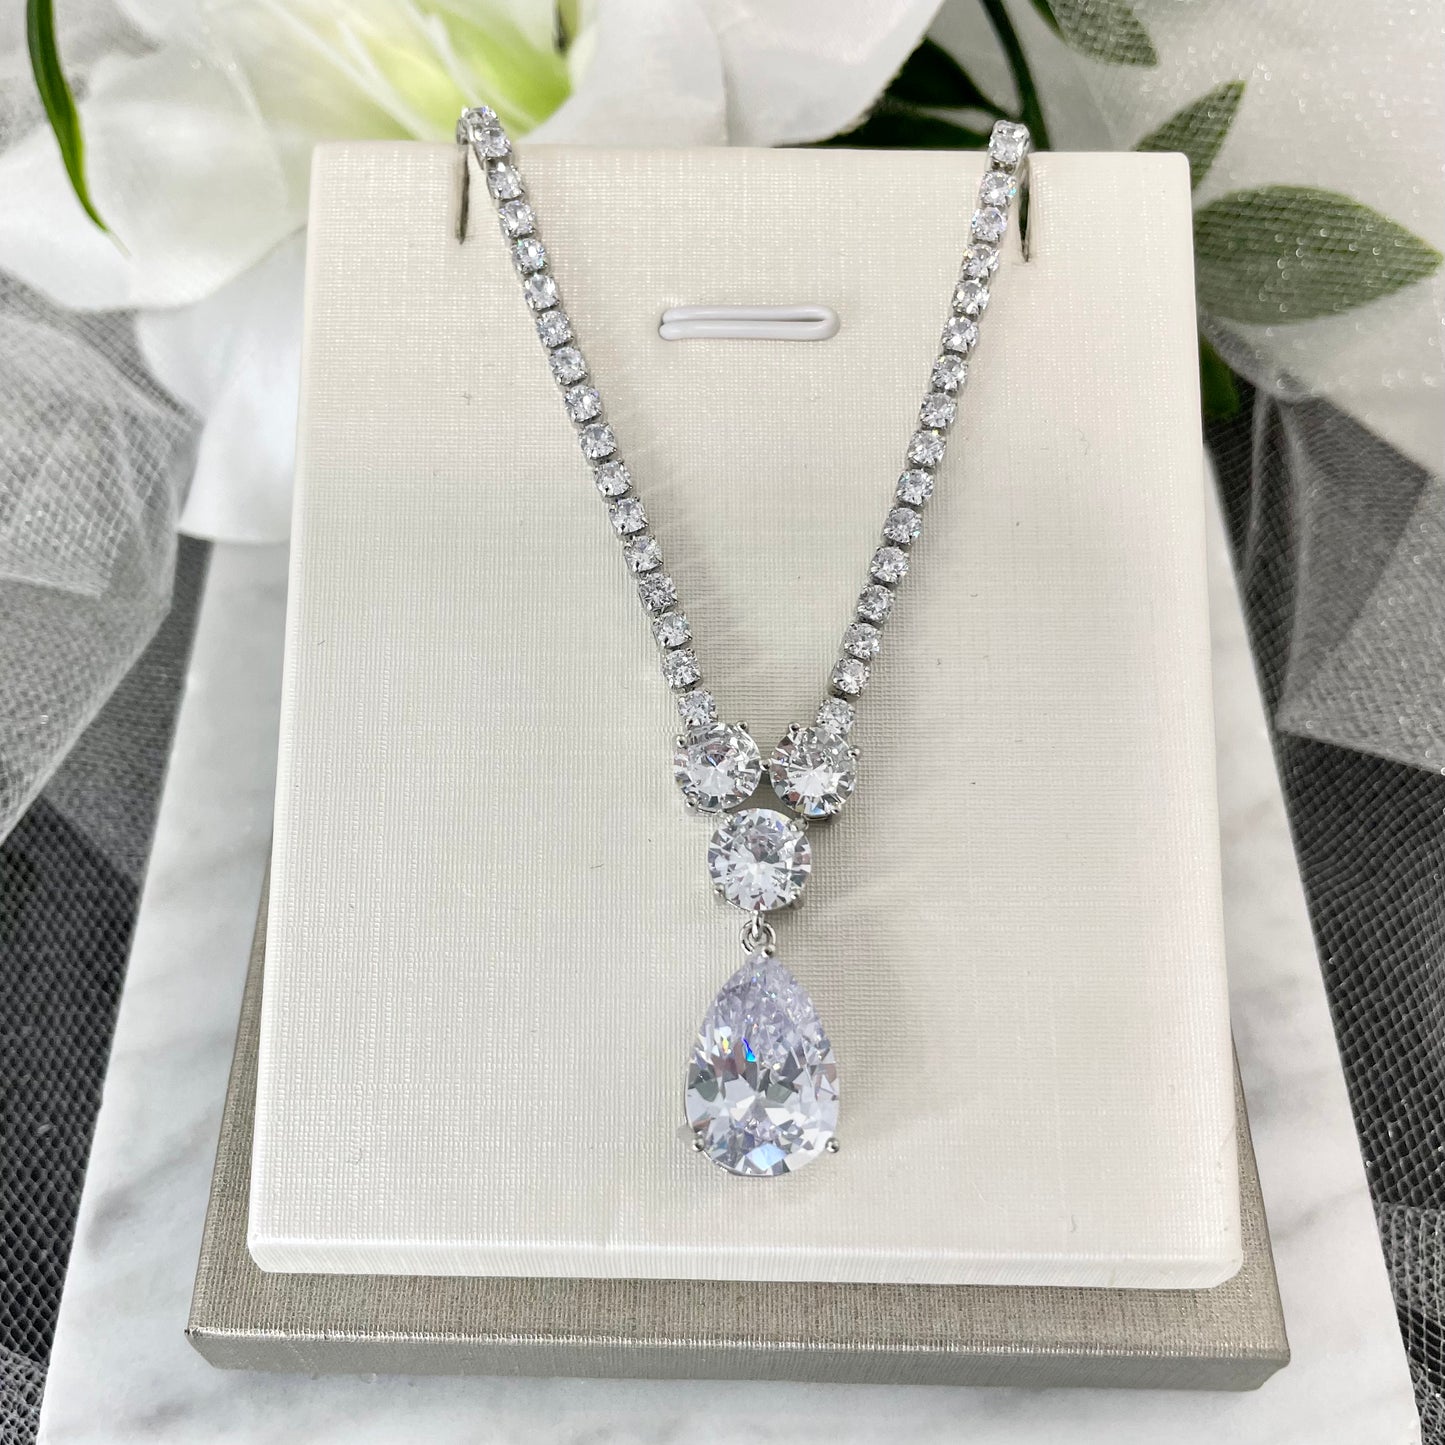 Dayna Diamanté Bridal Wedding Necklace: "Close-up of the Dayna Diamanté Bridal Wedding Necklace, featuring a delicate chain adorned with round Diamontes and a sparkling centerpiece consisting of three large Diamantés and a teardrop pendant."